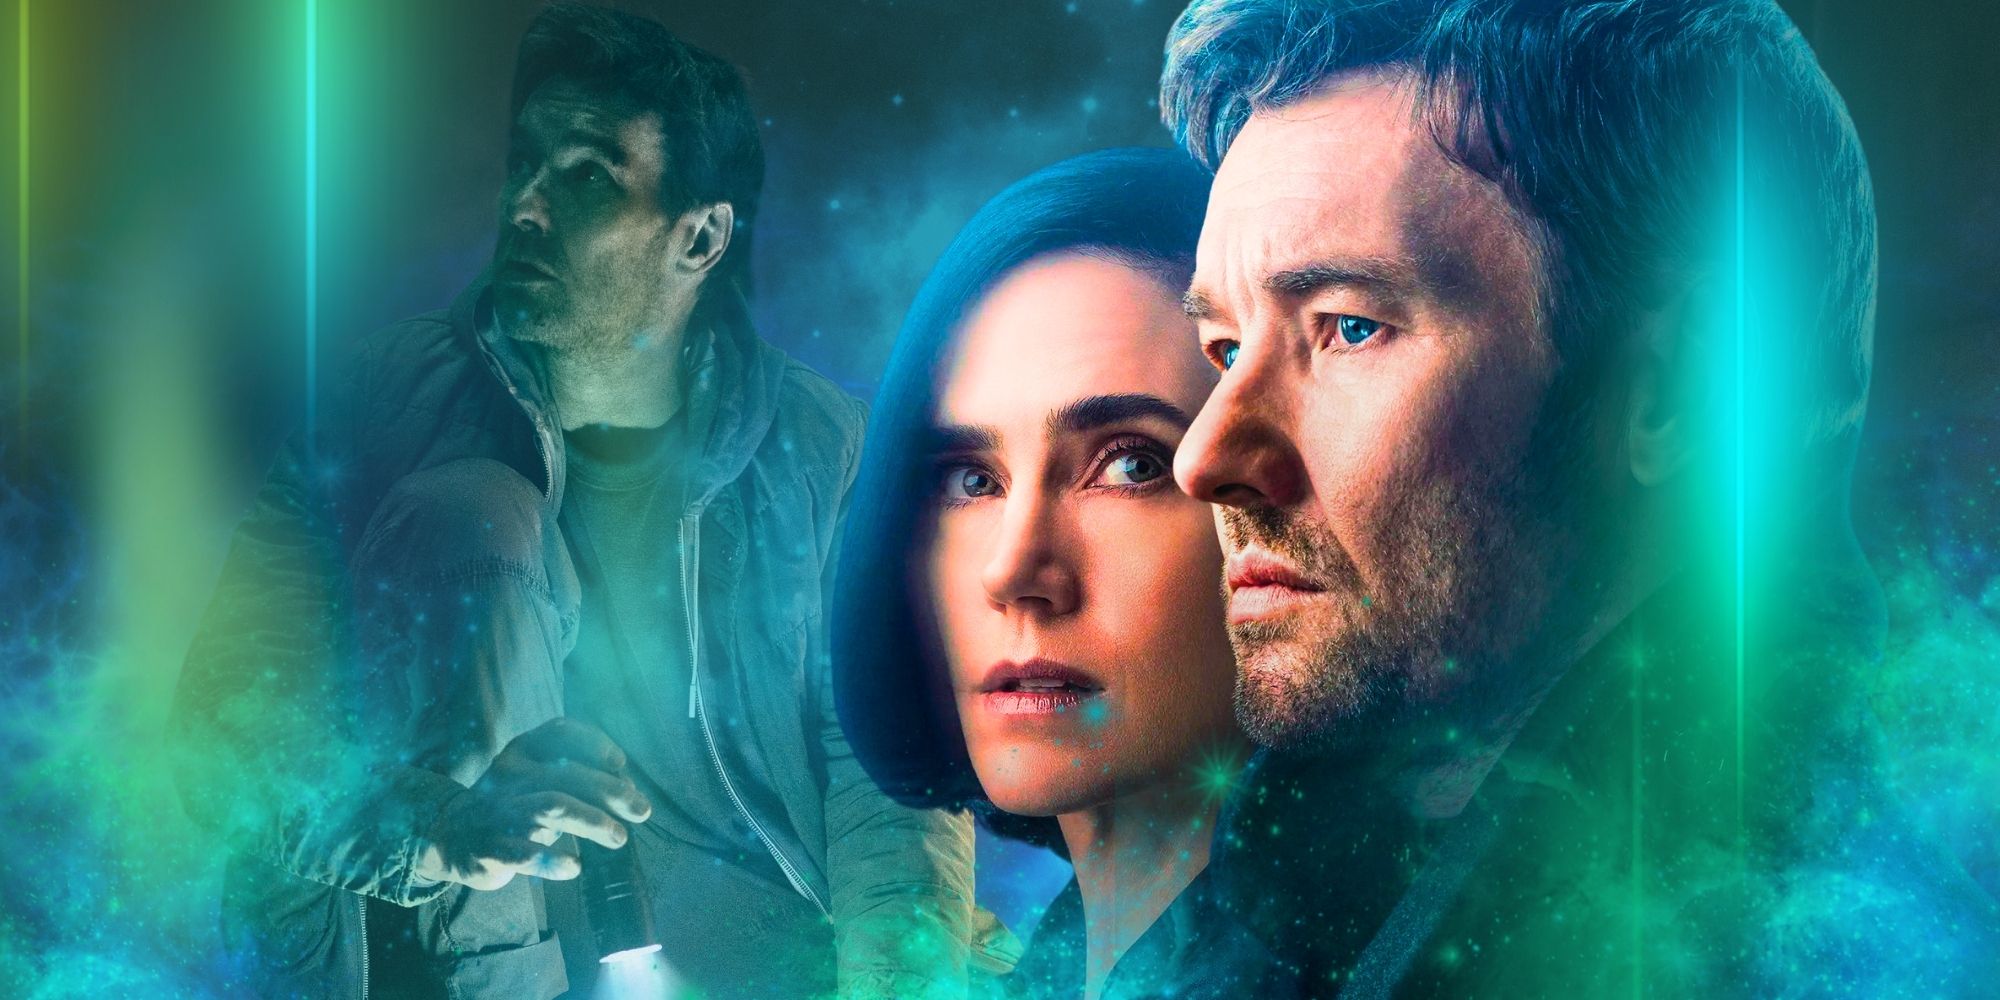 A custom image of Joel Edgerton as Jason Dessen from the Dark Matter poster along with his character's wife